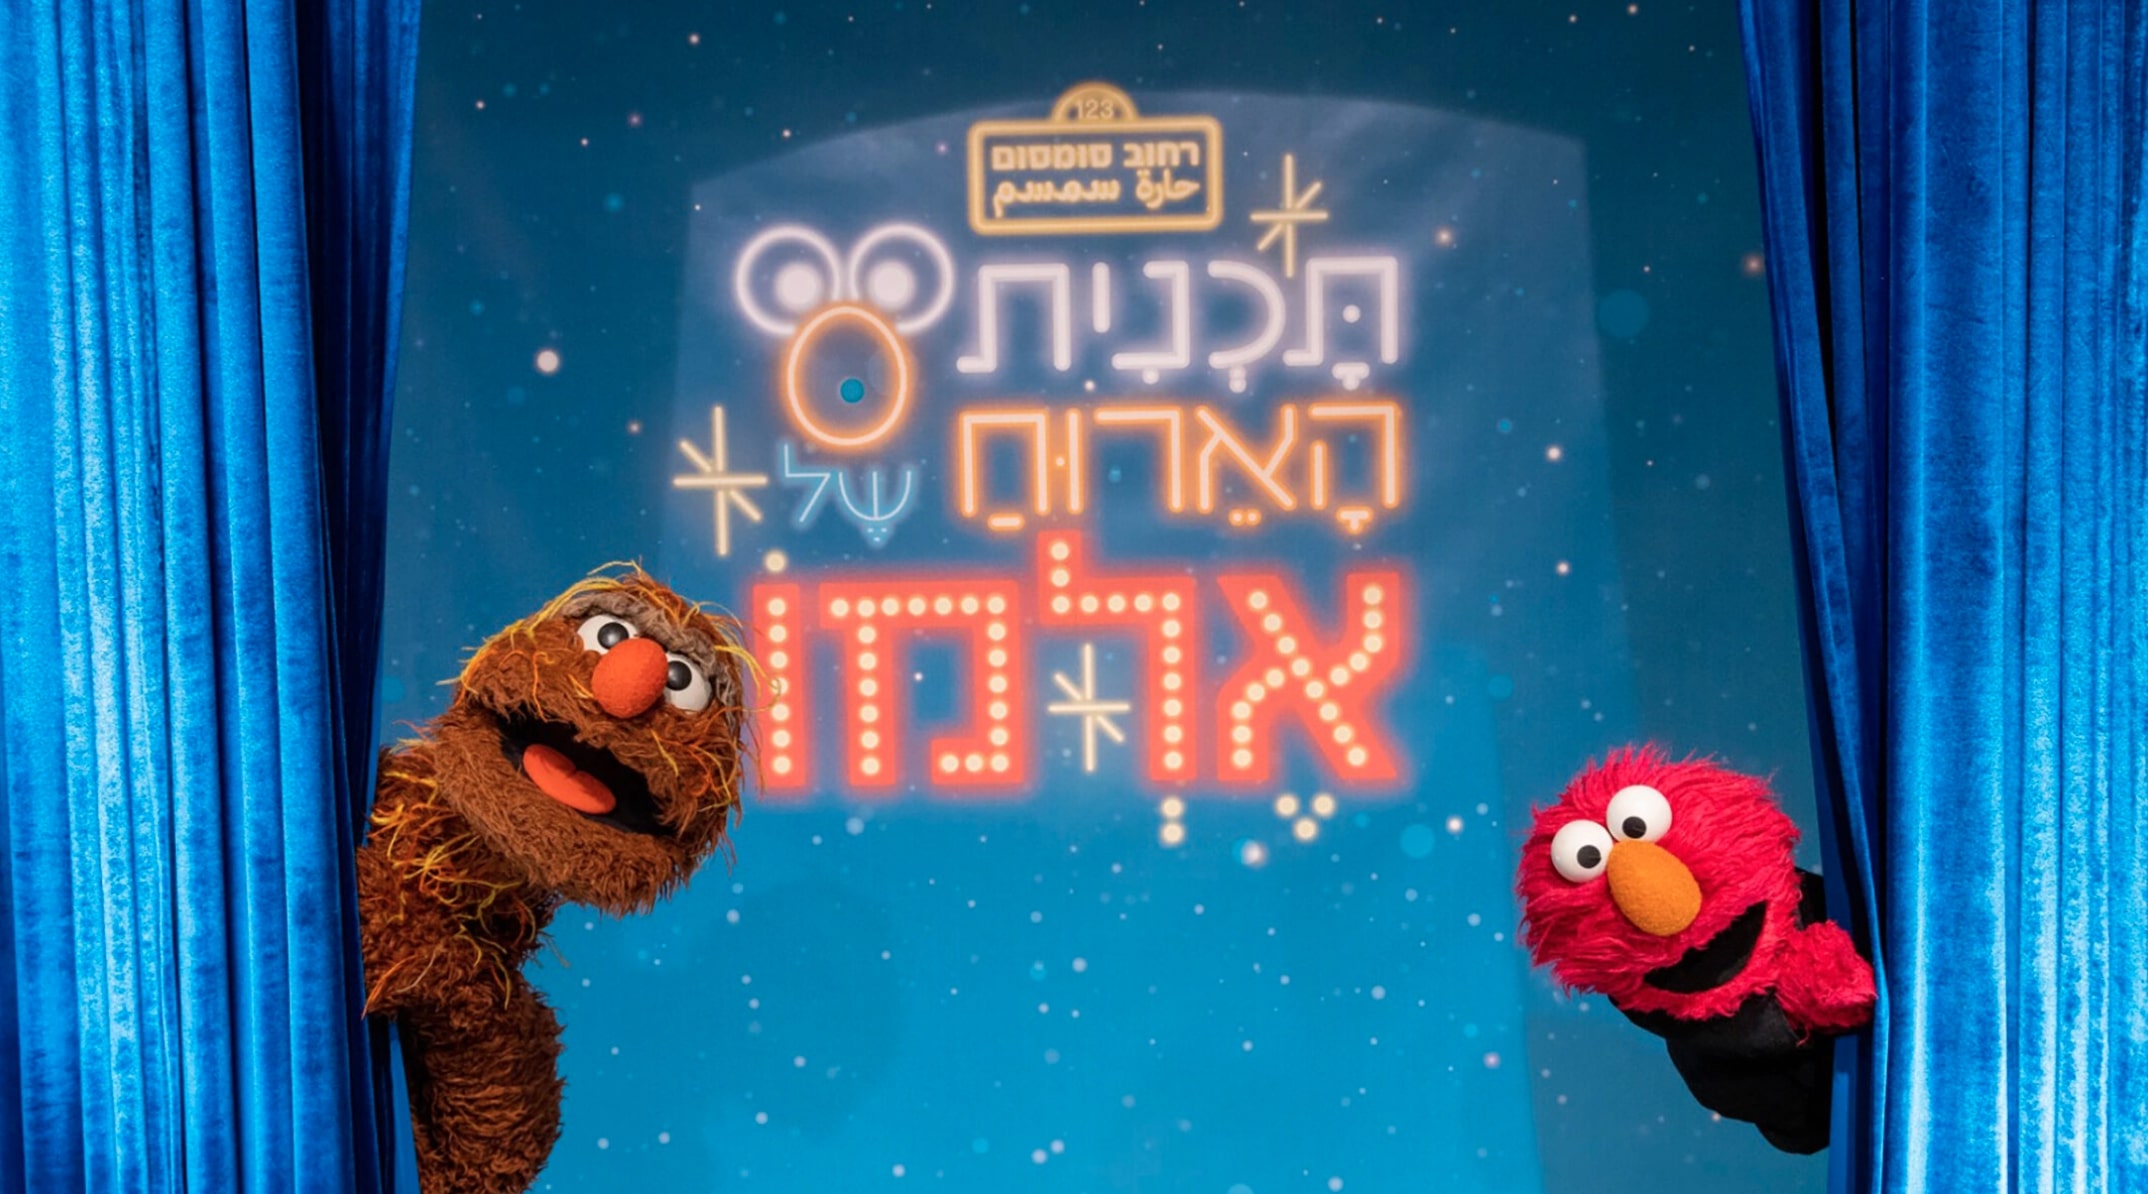 Not-Too-Late with Elmo' star-studded Israeli adaptation | The Times of Israel